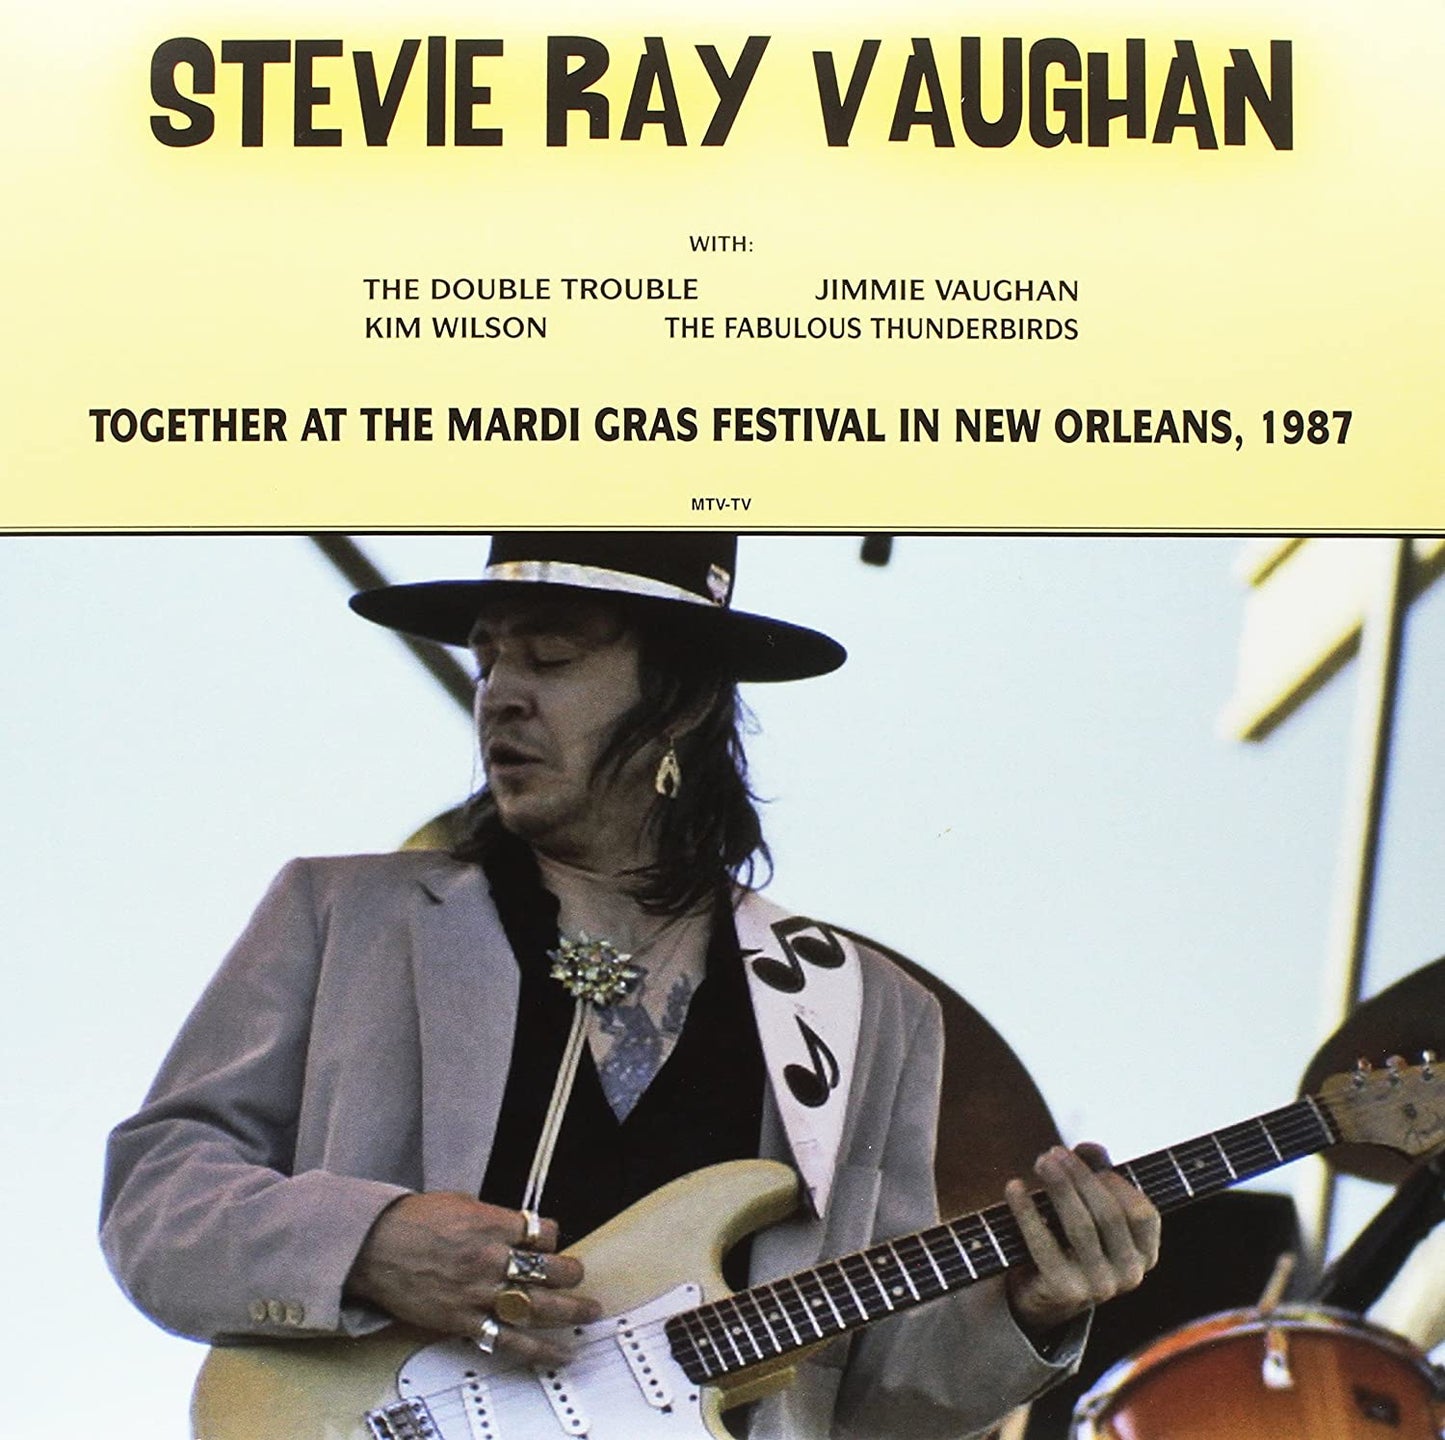 Vaughan, Stevie Ray/Live At The Mardi Gras Festival - New Orleans 1987 [LP]